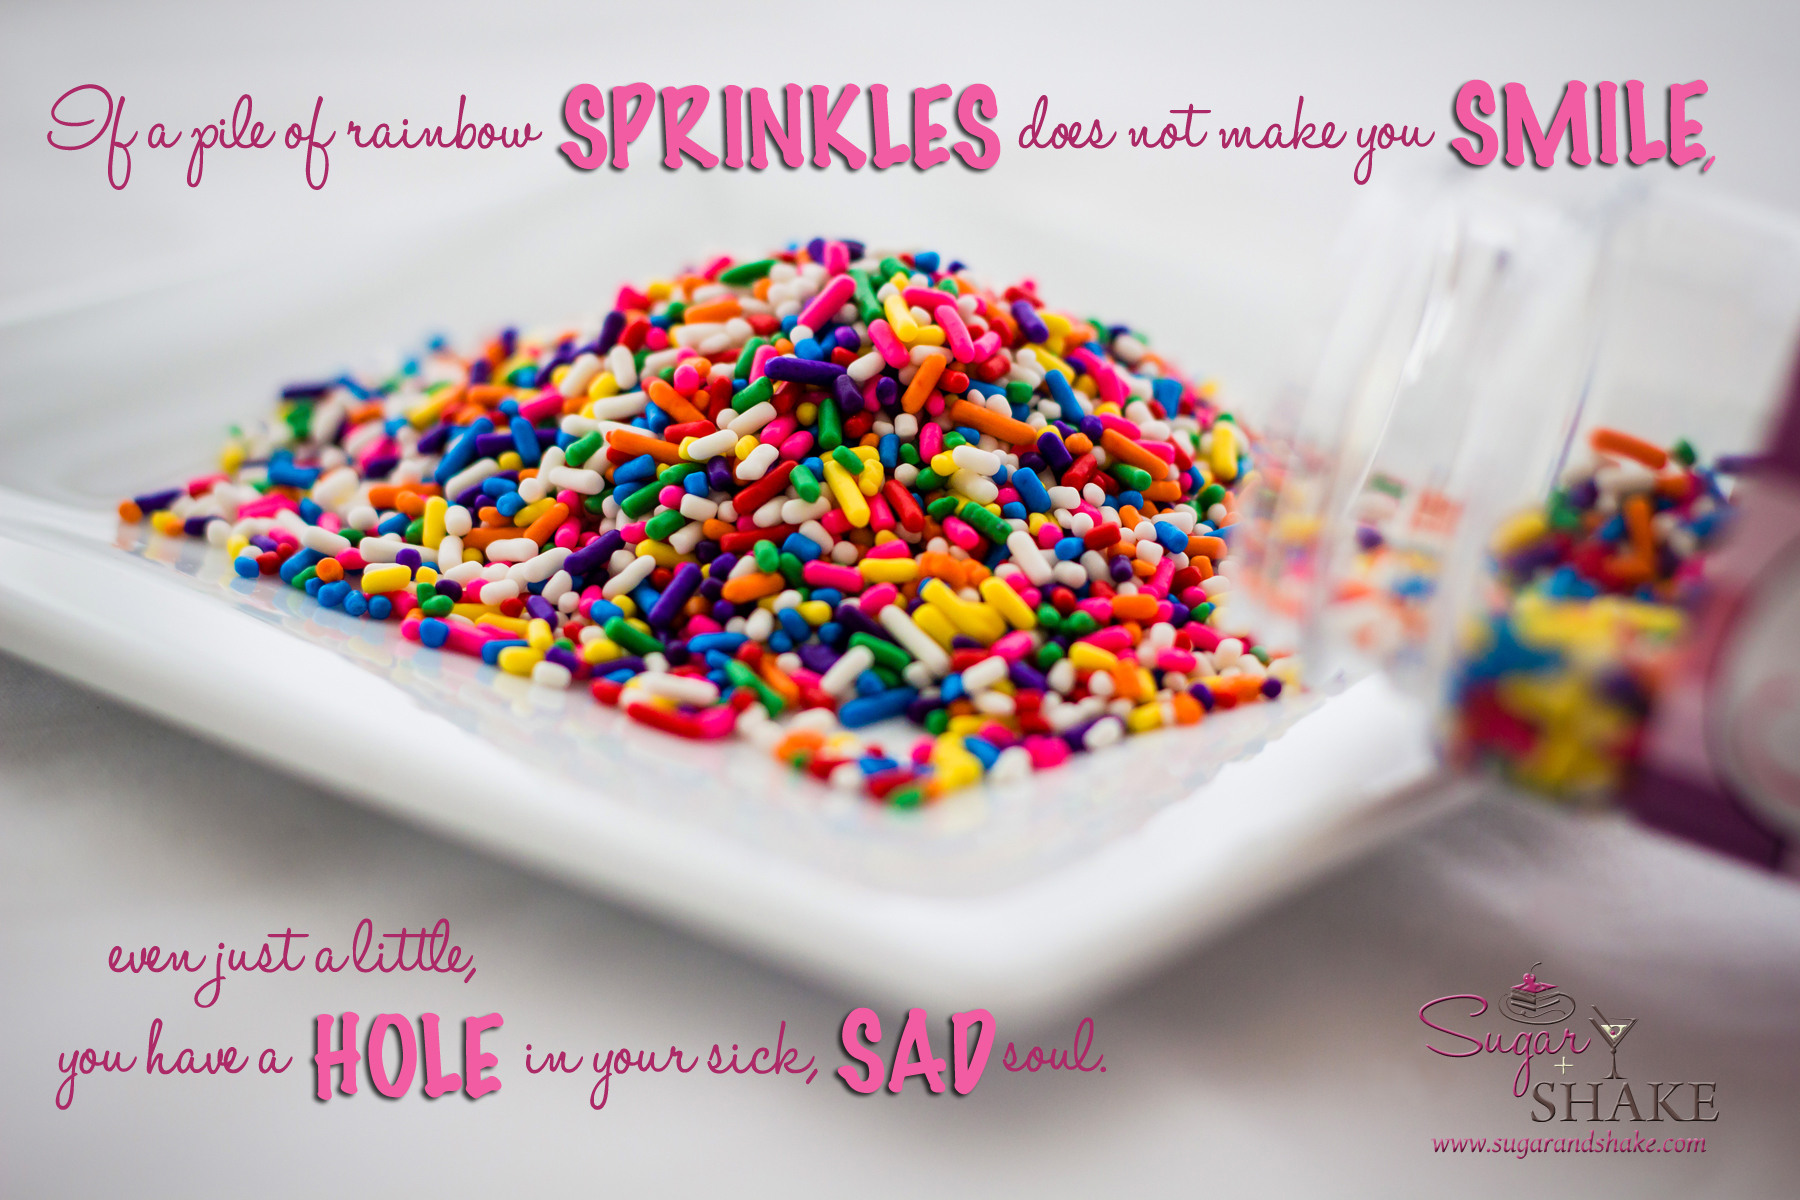 “If a pile of rainbow sprinkles does not make you smile, even just a little, you have a hole in your sick, sad soul.” | © 2013 Sugar + Shake